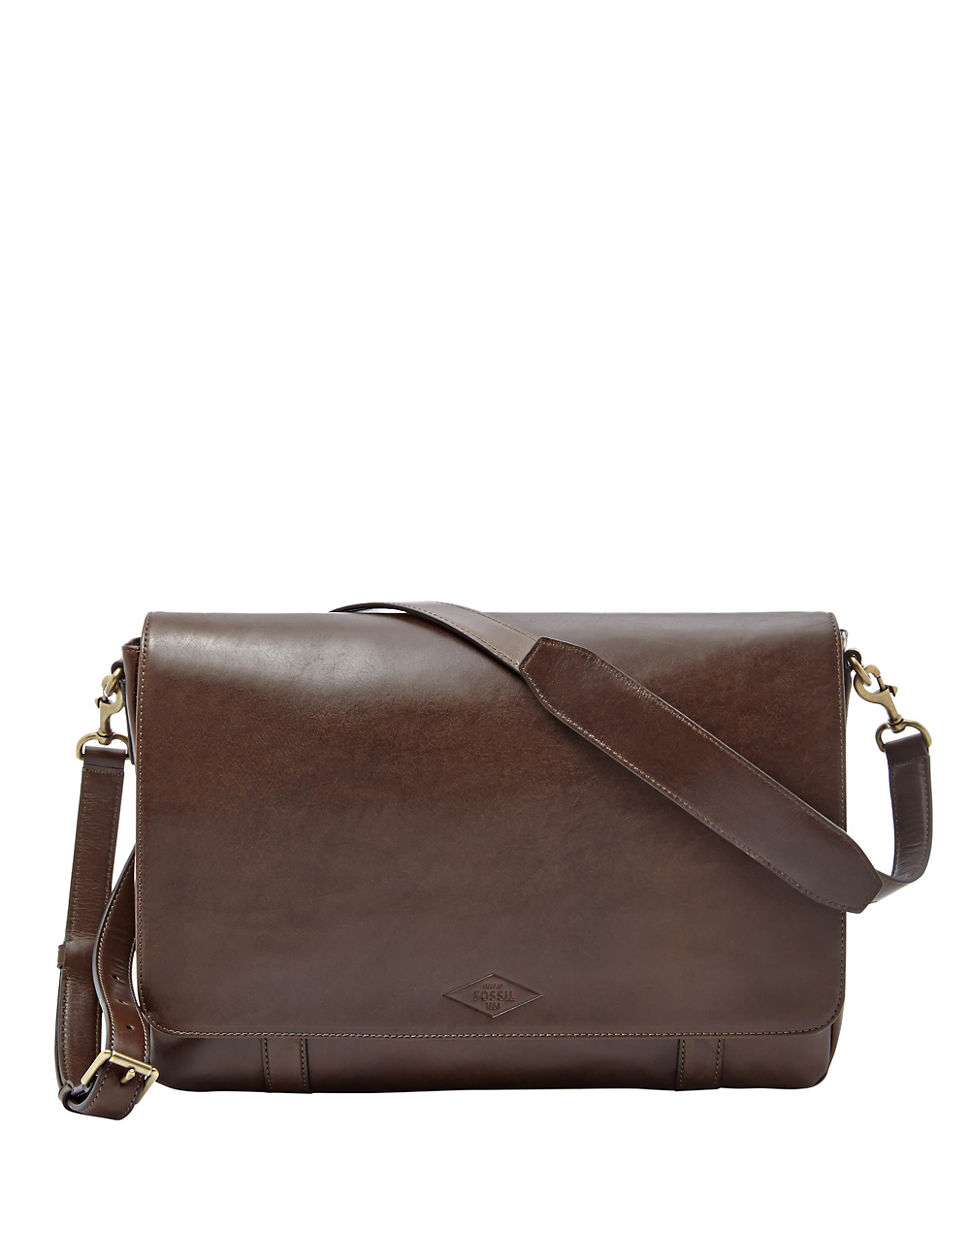 Lyst - Fossil Leather Messenger Bag in Brown for Men